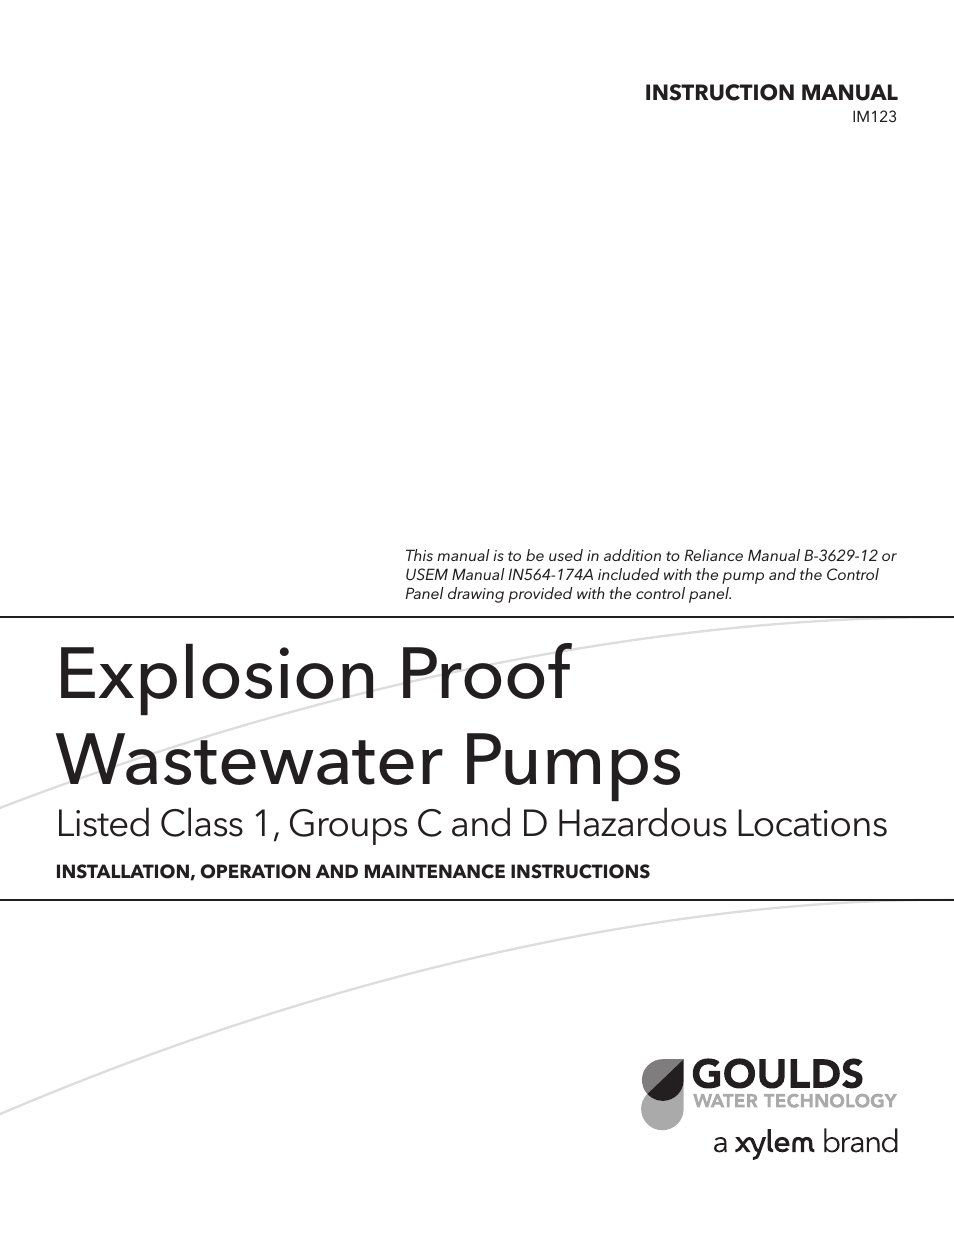 IM123 R04 Explosion Proof Wastewater Pumps Listed Class 1, Groups C and D Hazardous Locations